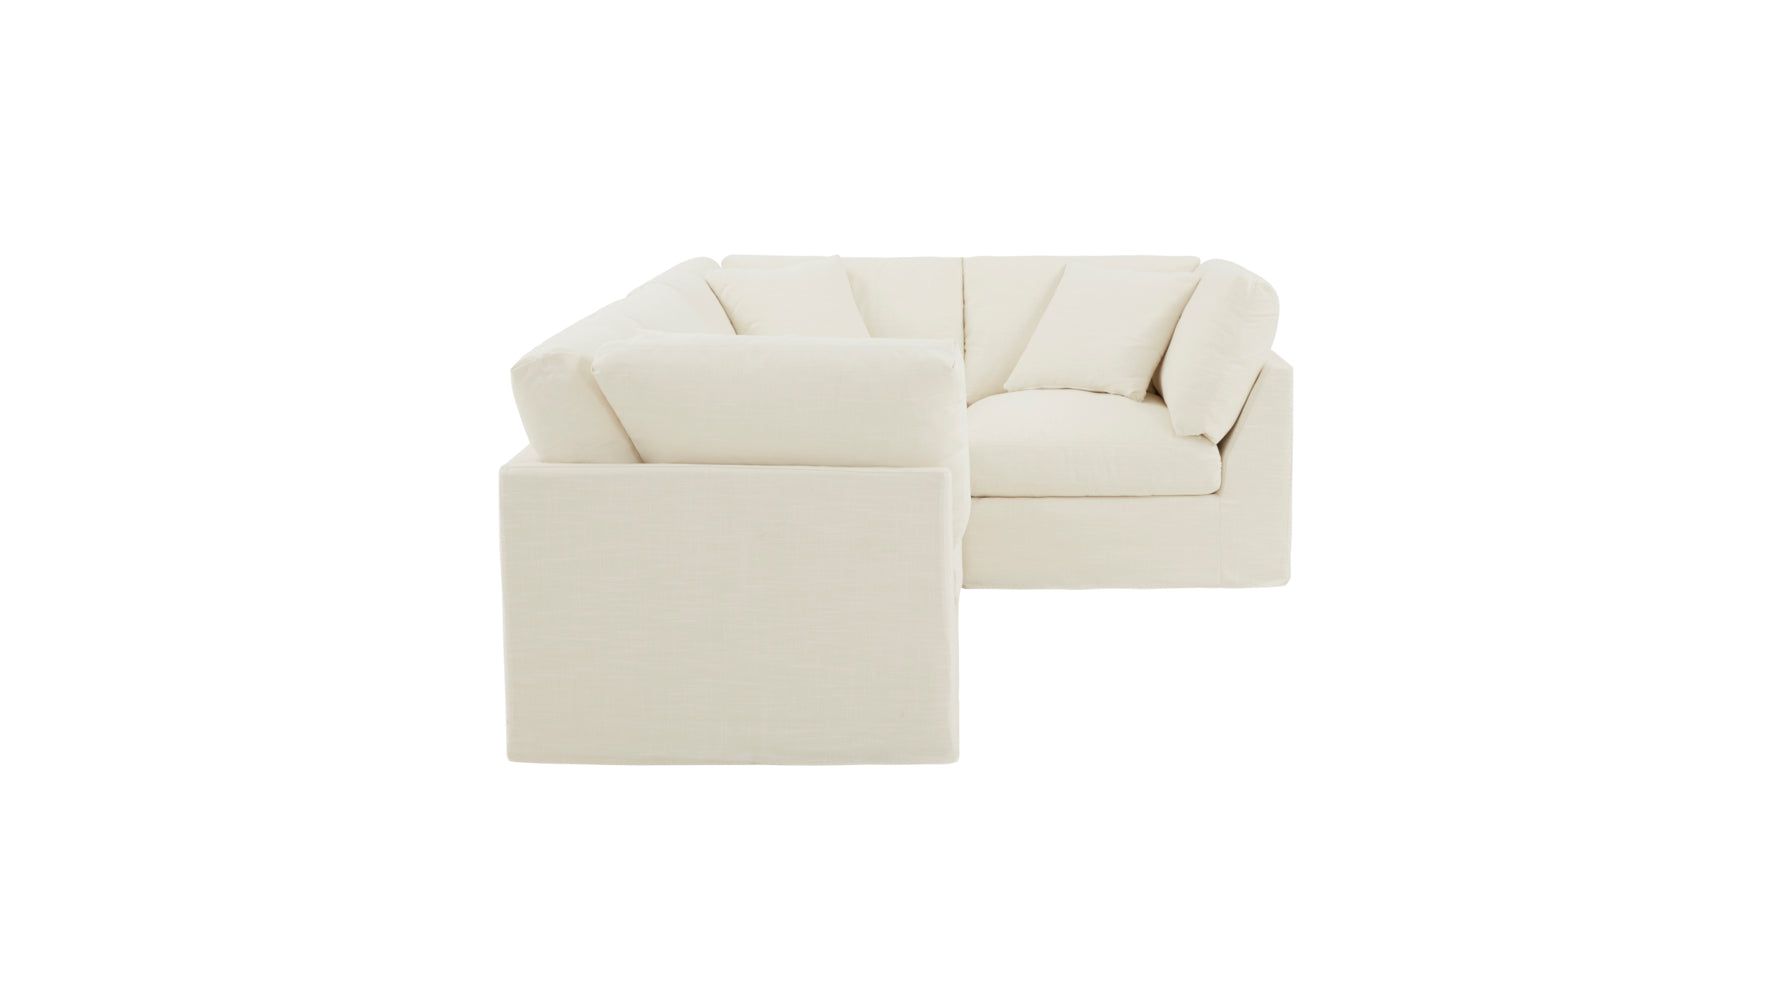 Get Together™ 4-Piece Modular Sectional Closed, Standard, Cream Linen - Image 5